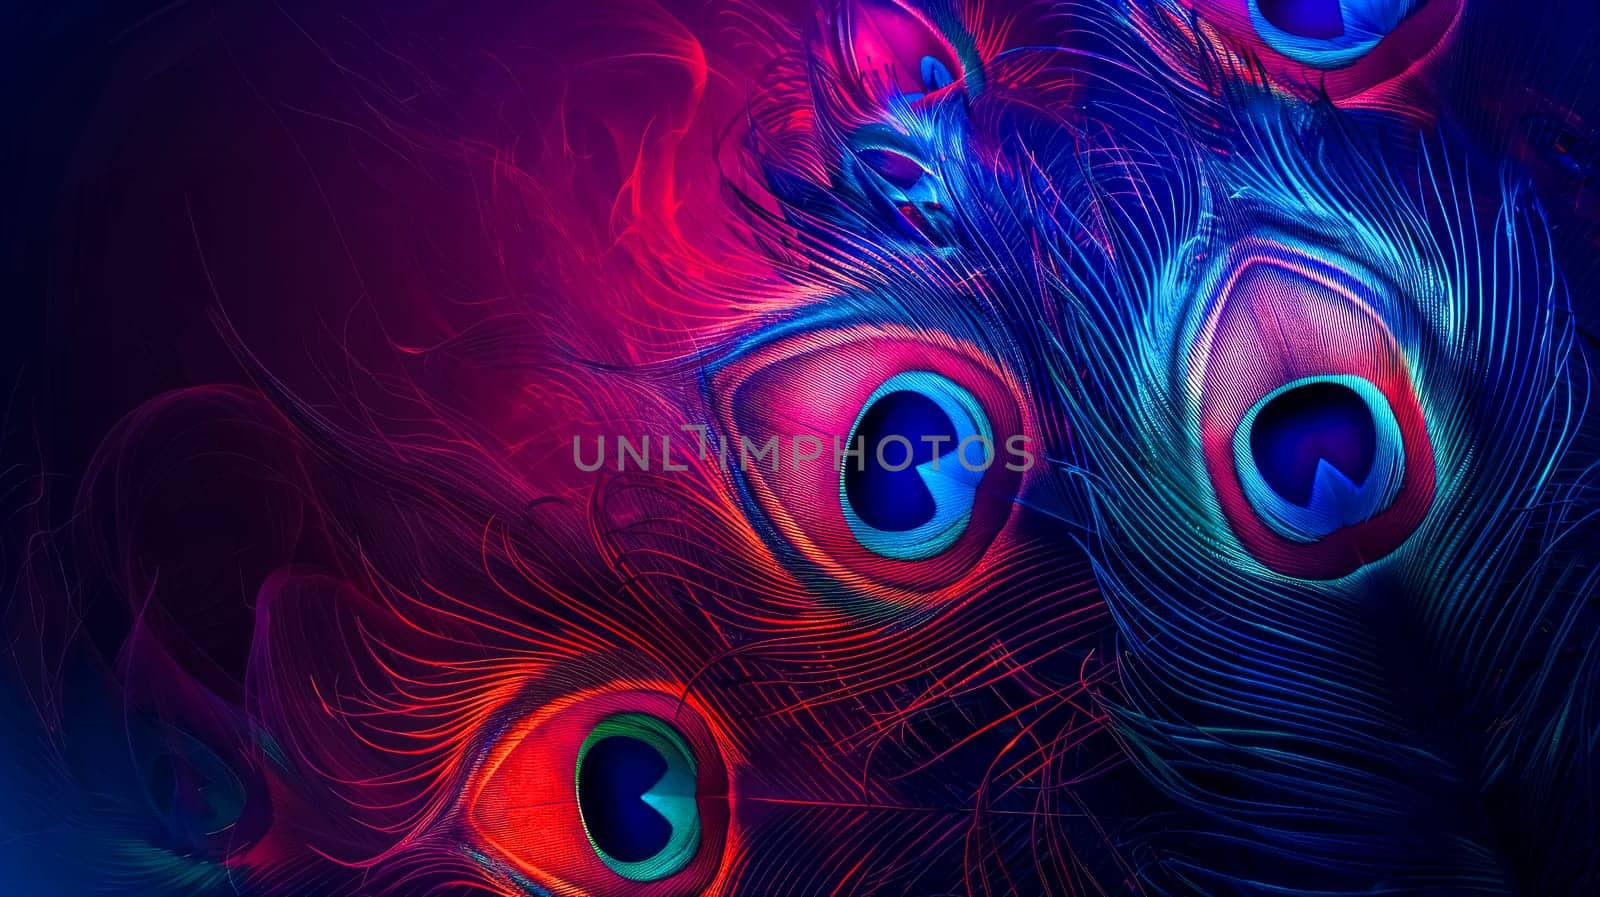 Vibrant peacock feathers abstract background by Edophoto